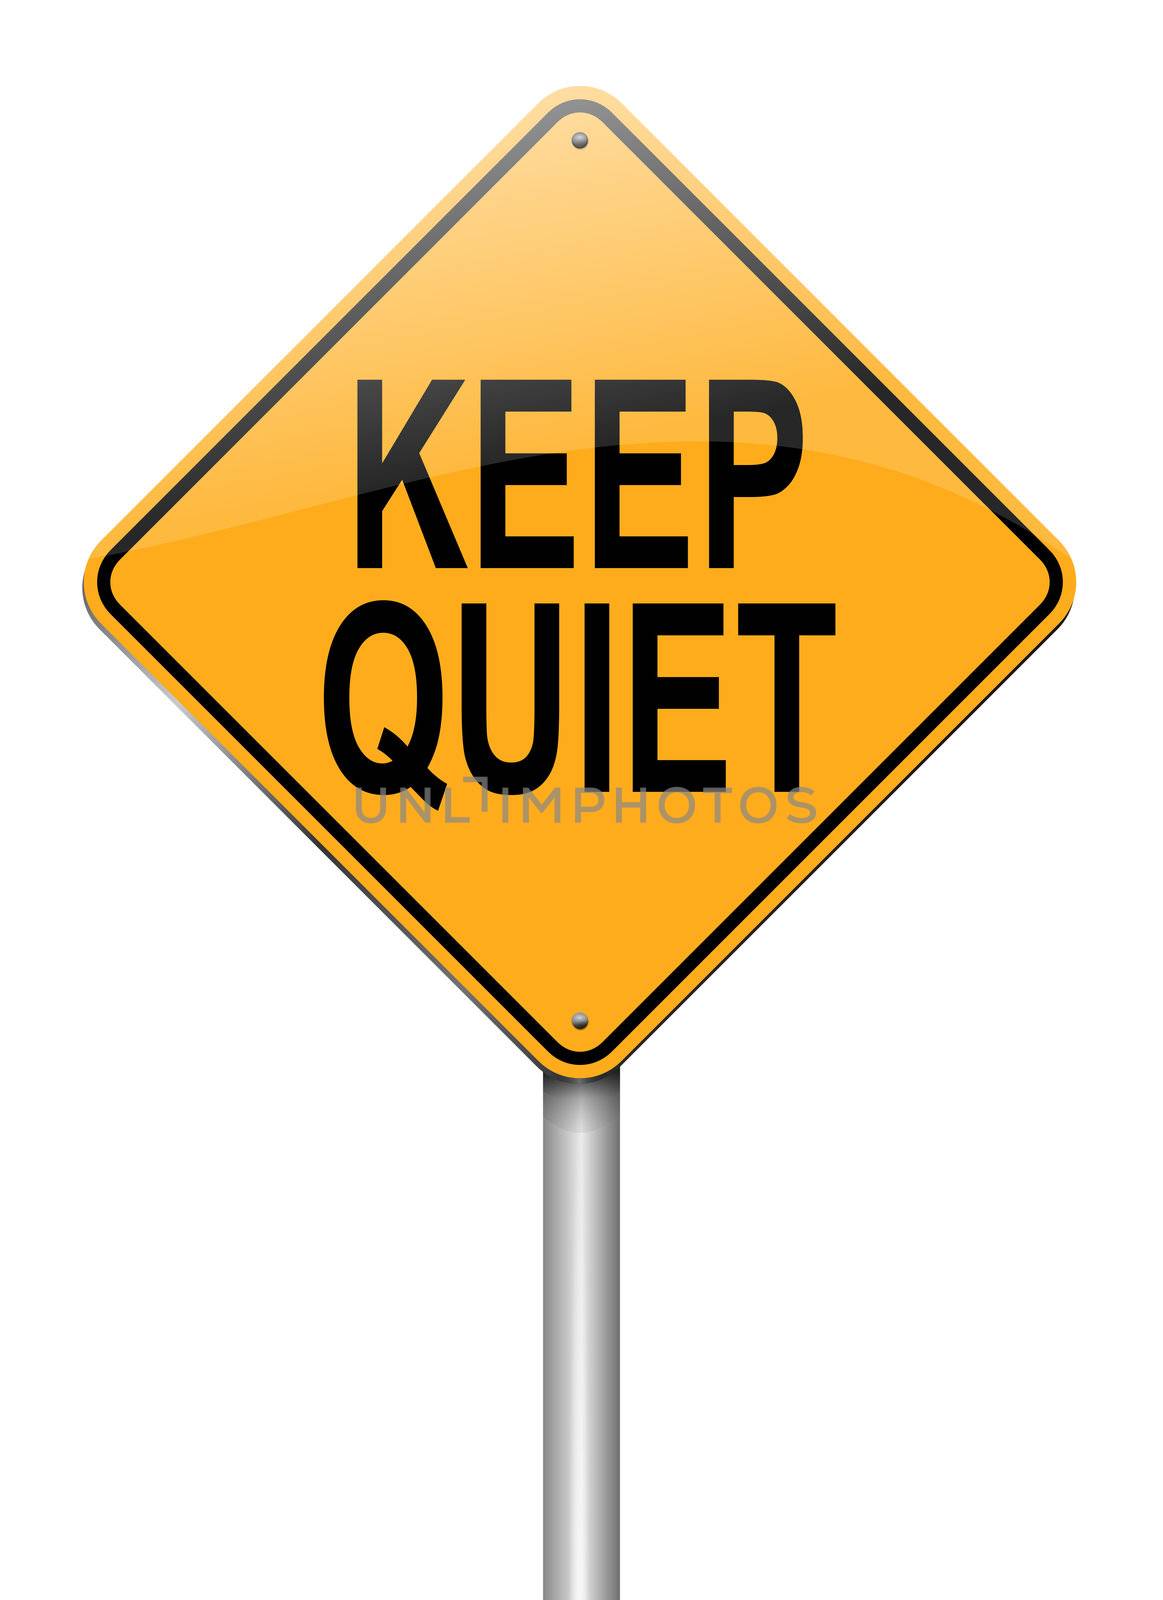 Illustration depicting a roadsign with a keep quiet concept. White background.